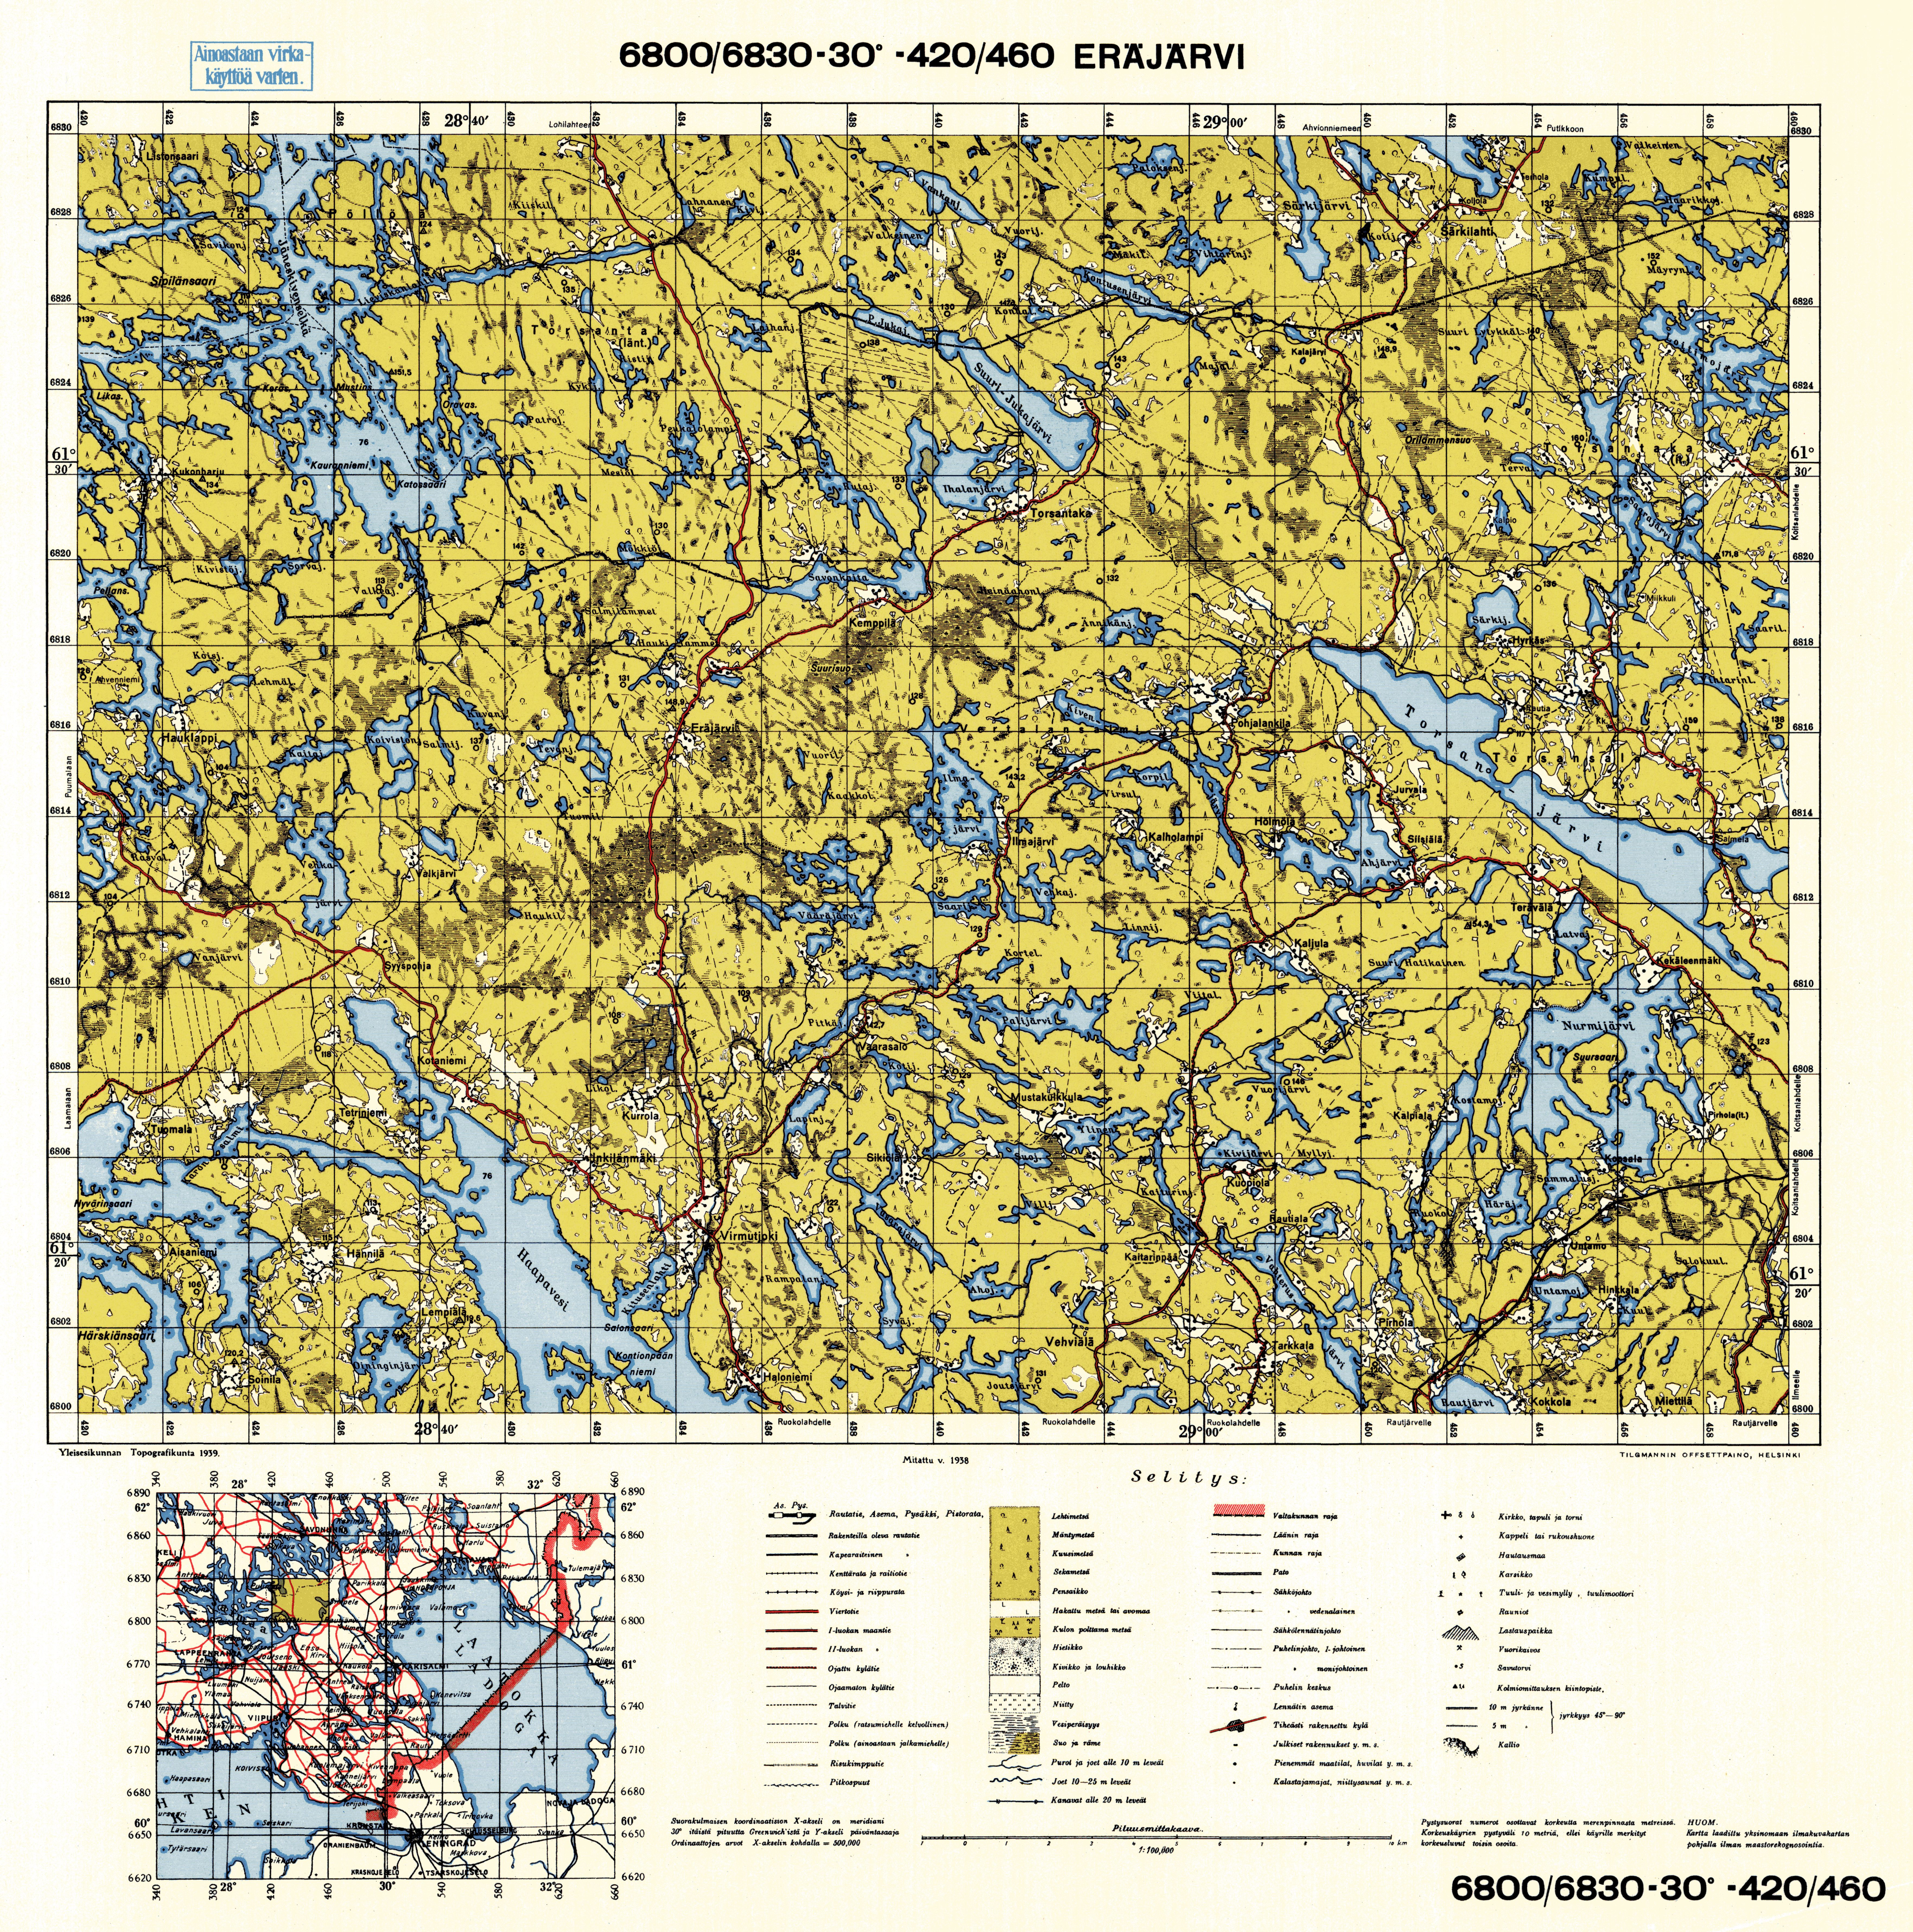 Eräjärvi. Topografikartta 4121. Topographic map from 1938. Use the zooming tool to explore in higher level of detail. Obtain as a quality print or high resolution image